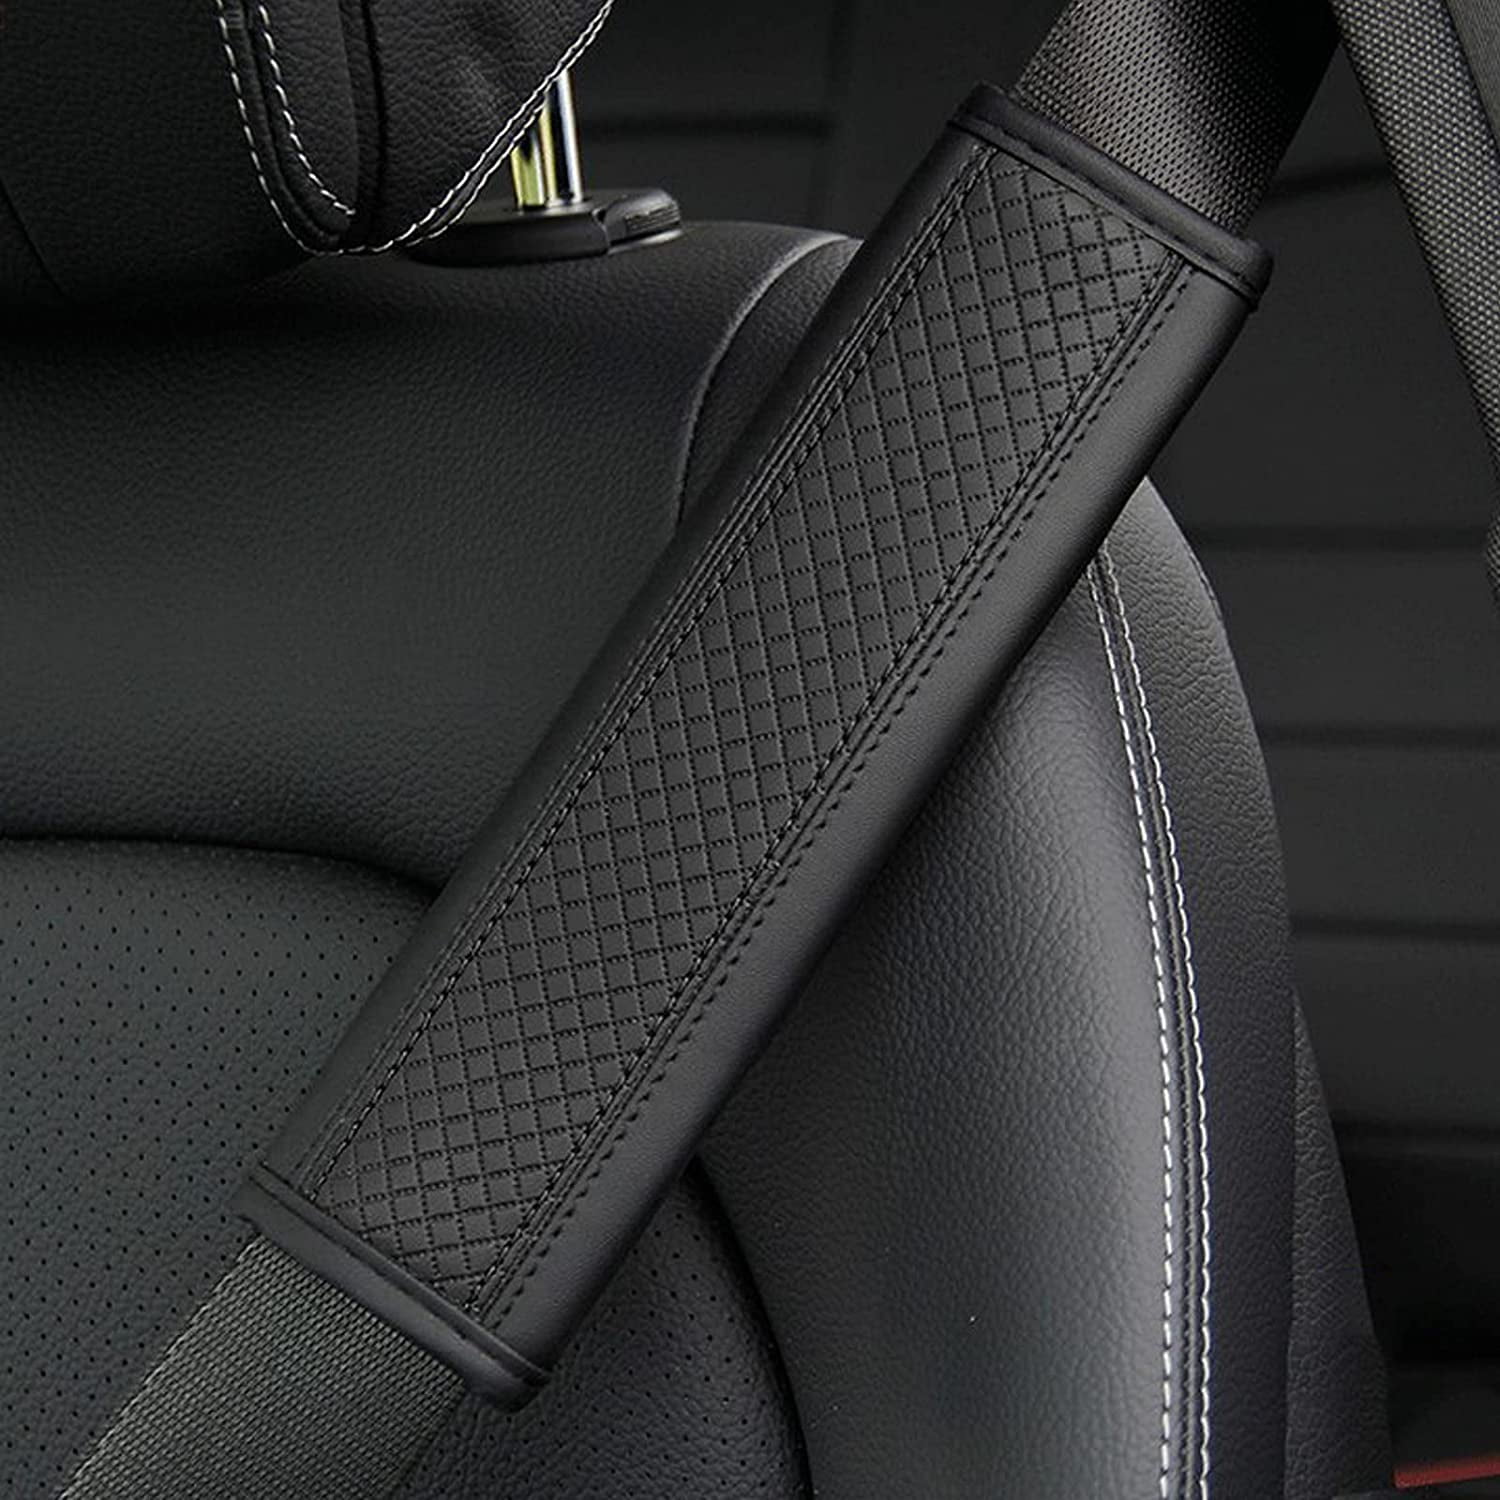 Auto Car Safety Seat Belt Strap PU Leather Shoulder Soft Cushions Pads Cover S 